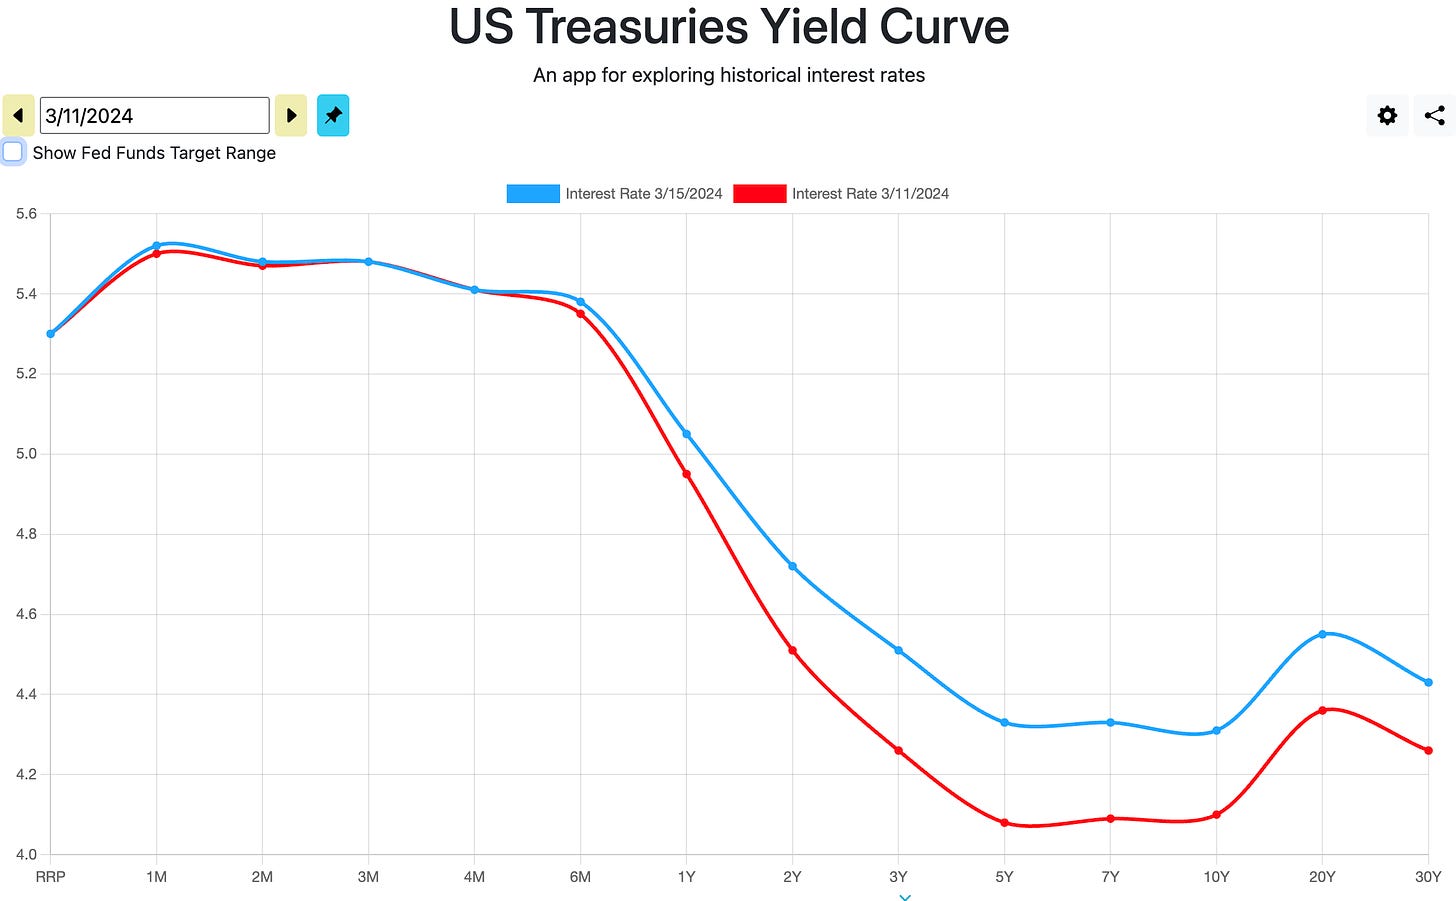 US Treasuries Yield Curve historical interest rates